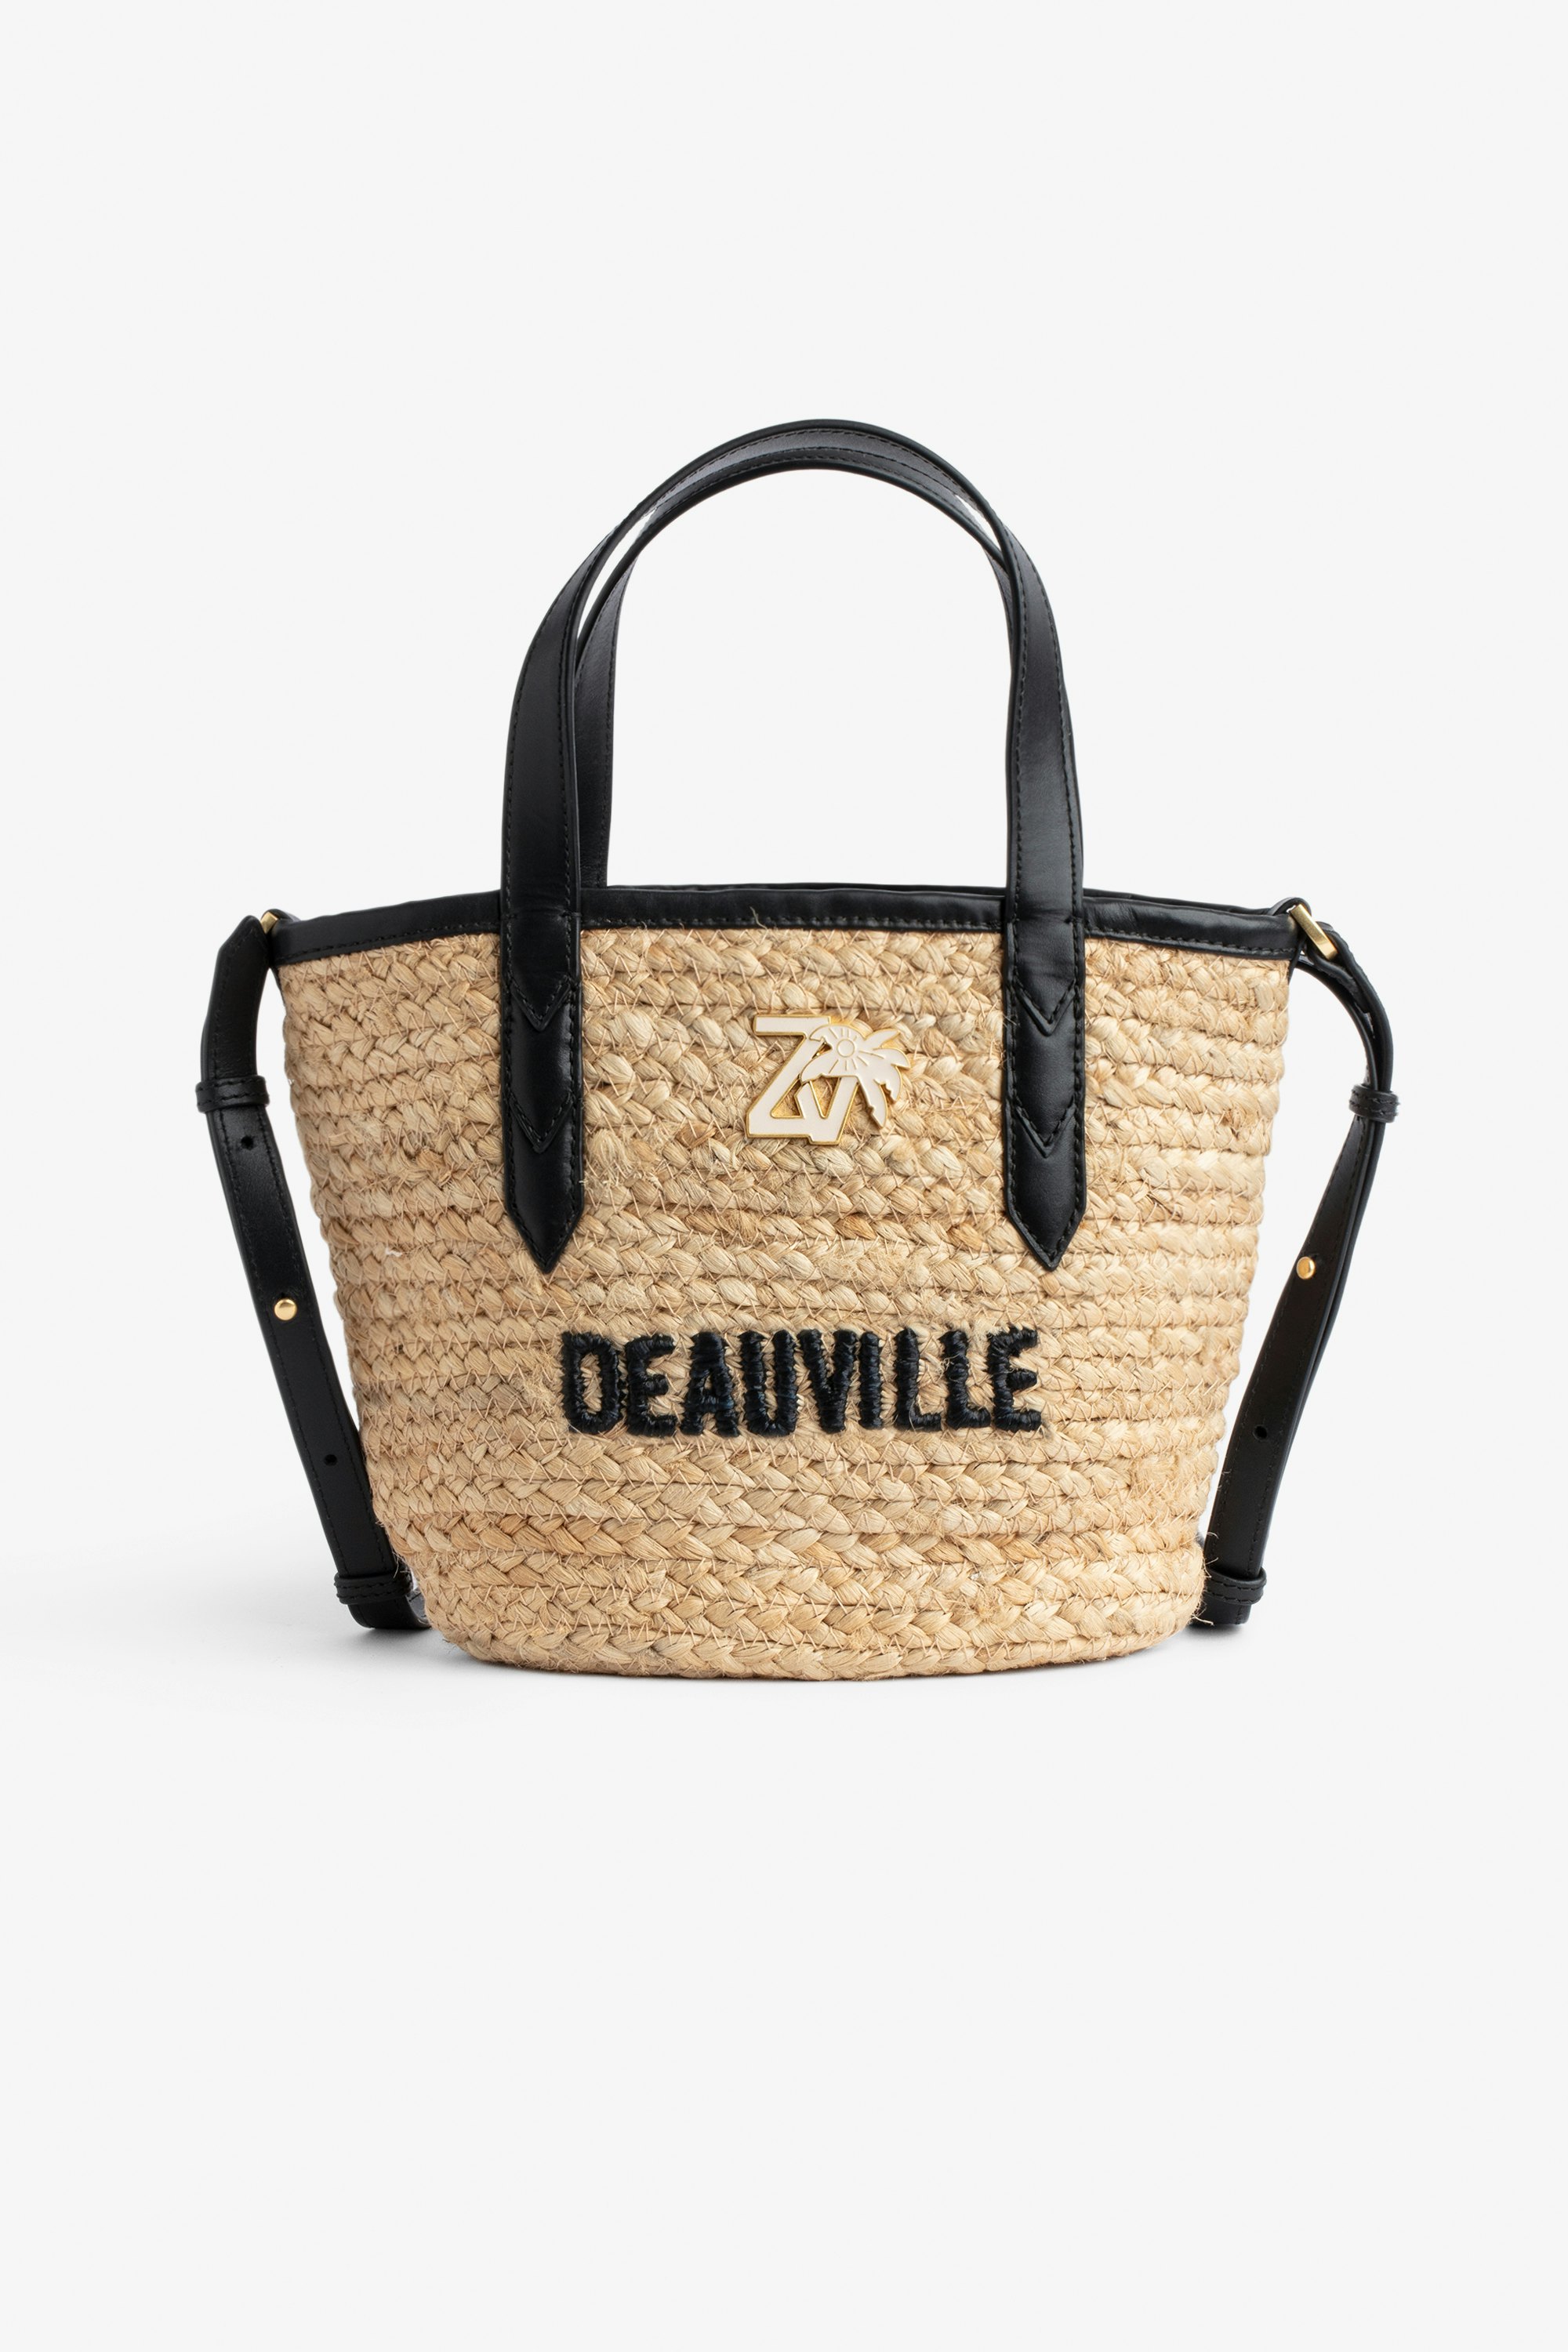 Le Baby Beach Bag - Women's straw bag with black leather shoulder strap, "Deauville" embroidery and ZV charm